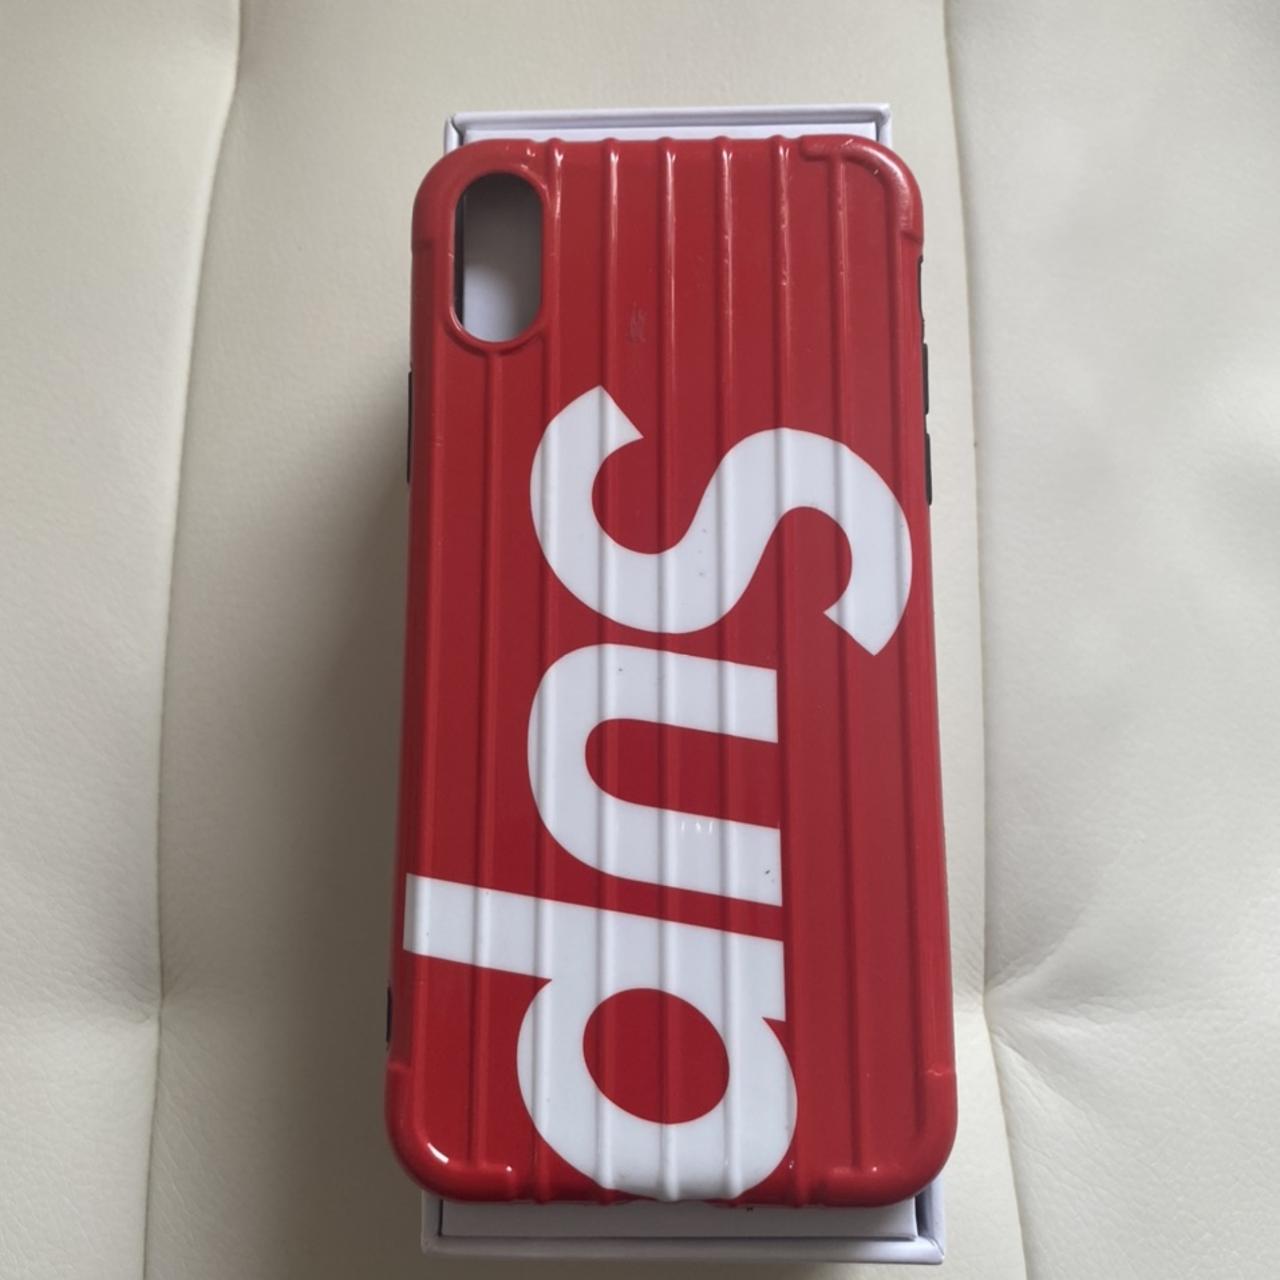 SUPREME IPHONE X CASE! Brand new! DM for more - Depop